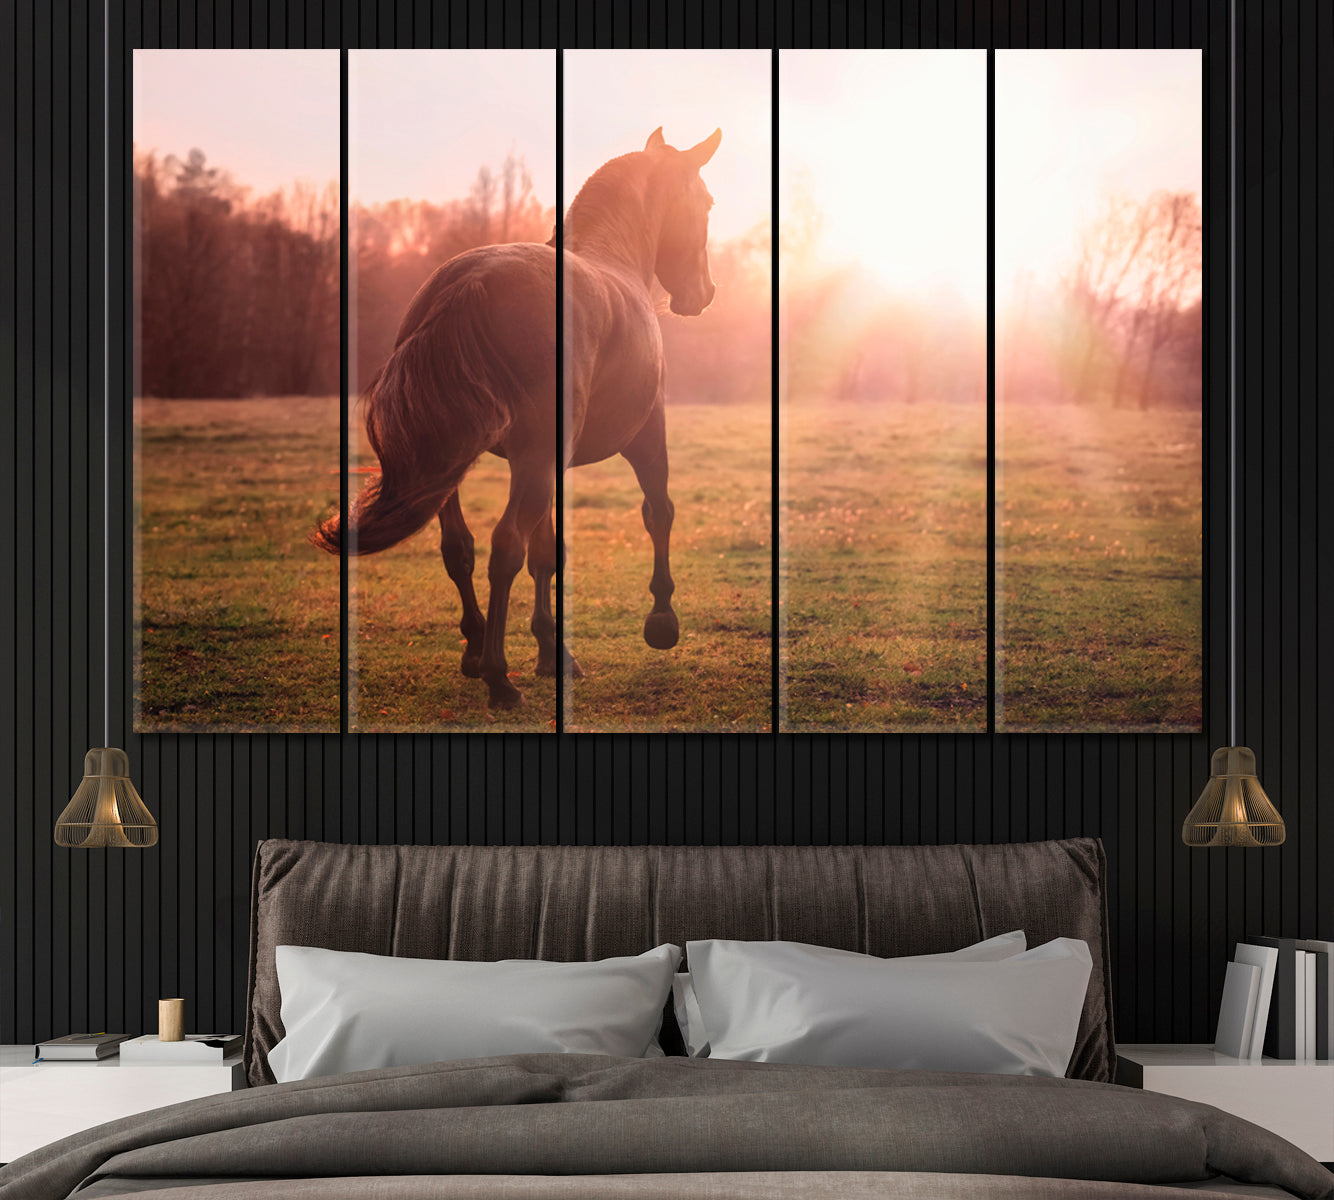 Andalusian Horse in Field Canvas Print ArtLexy 5 Panels 36"x24" inches 